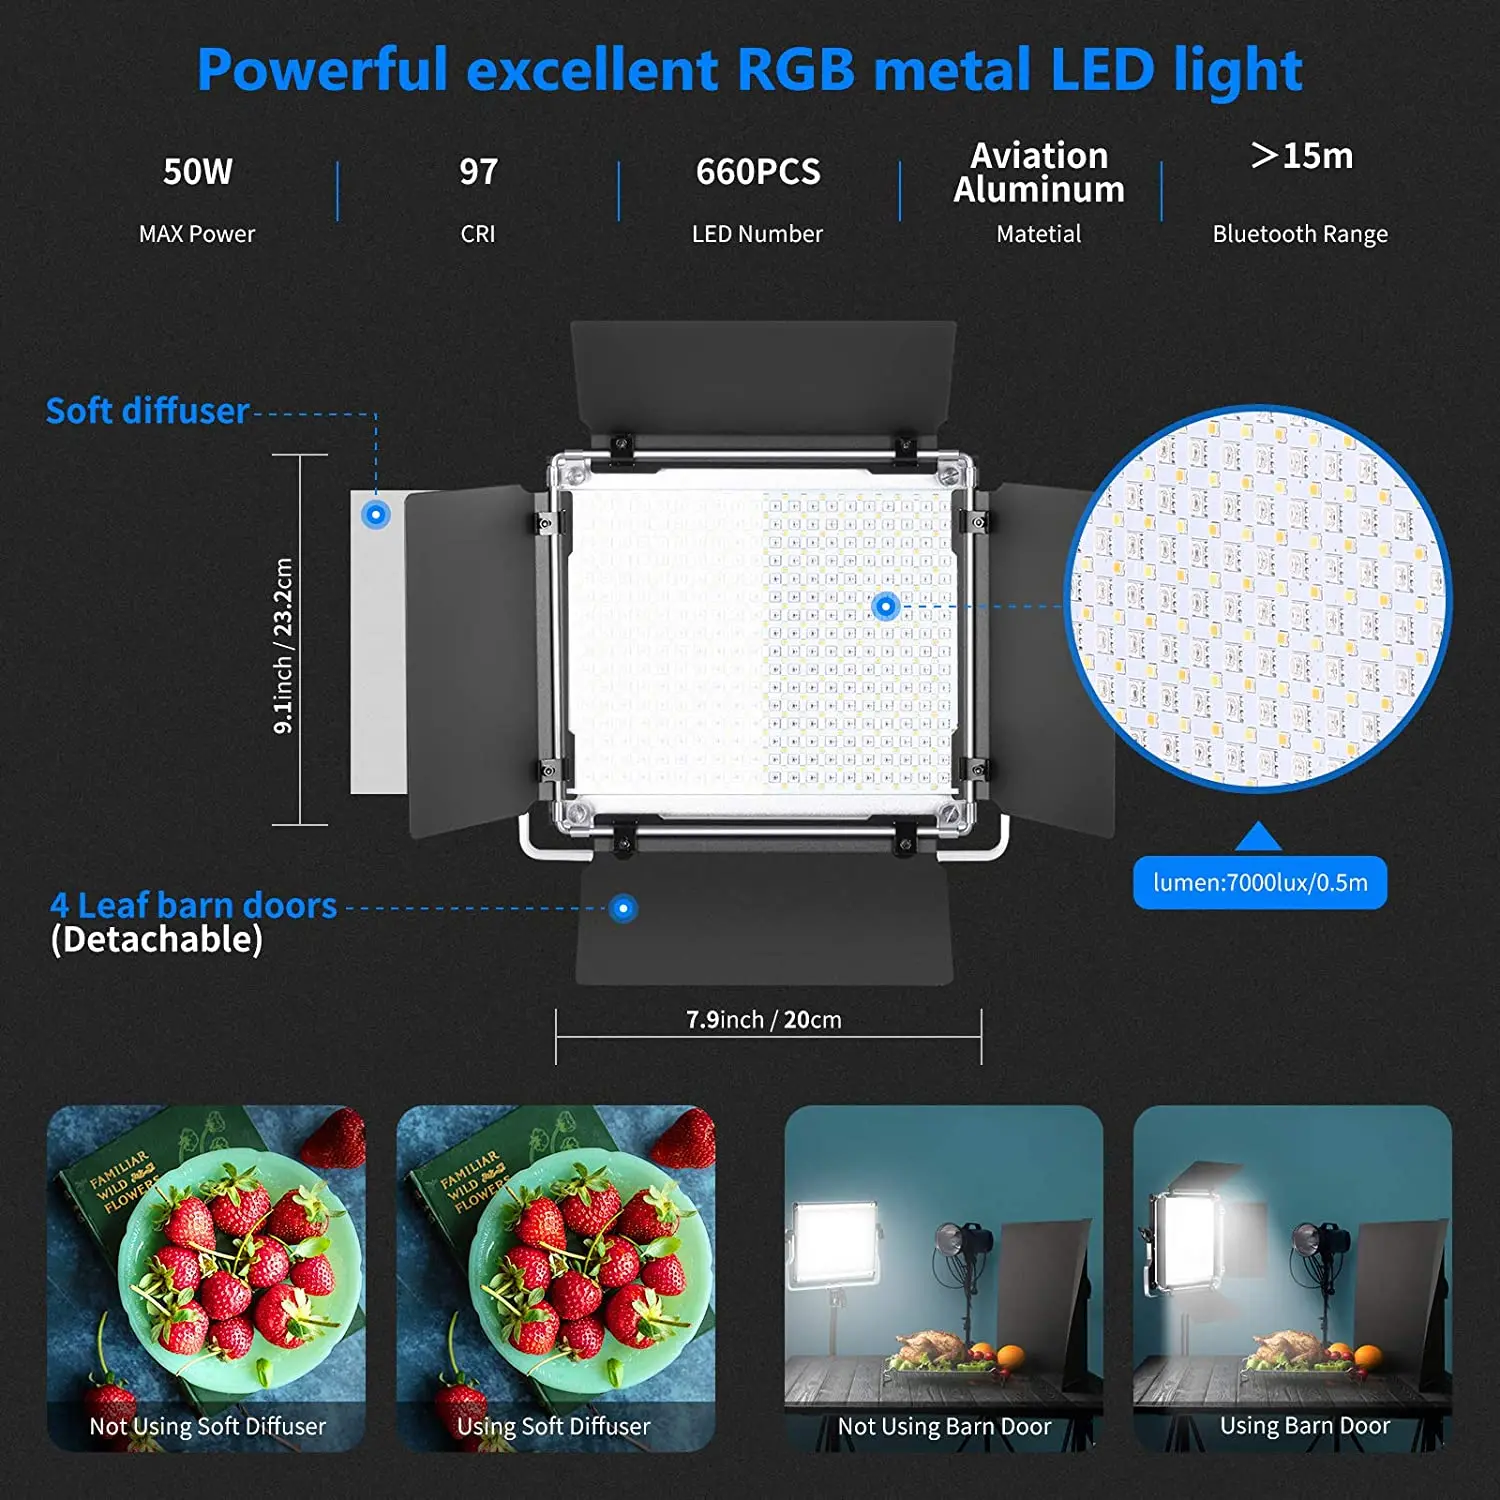 for Gaming,Streaming,Zoom,YouTube,Webex,Broadcasting,Web Conference,Photography Neewer 2 Packs 530 PRO RGB Led Video Light with APP Control Softbox Kit,360°Full Color,45W Video Lighting CRI 97 